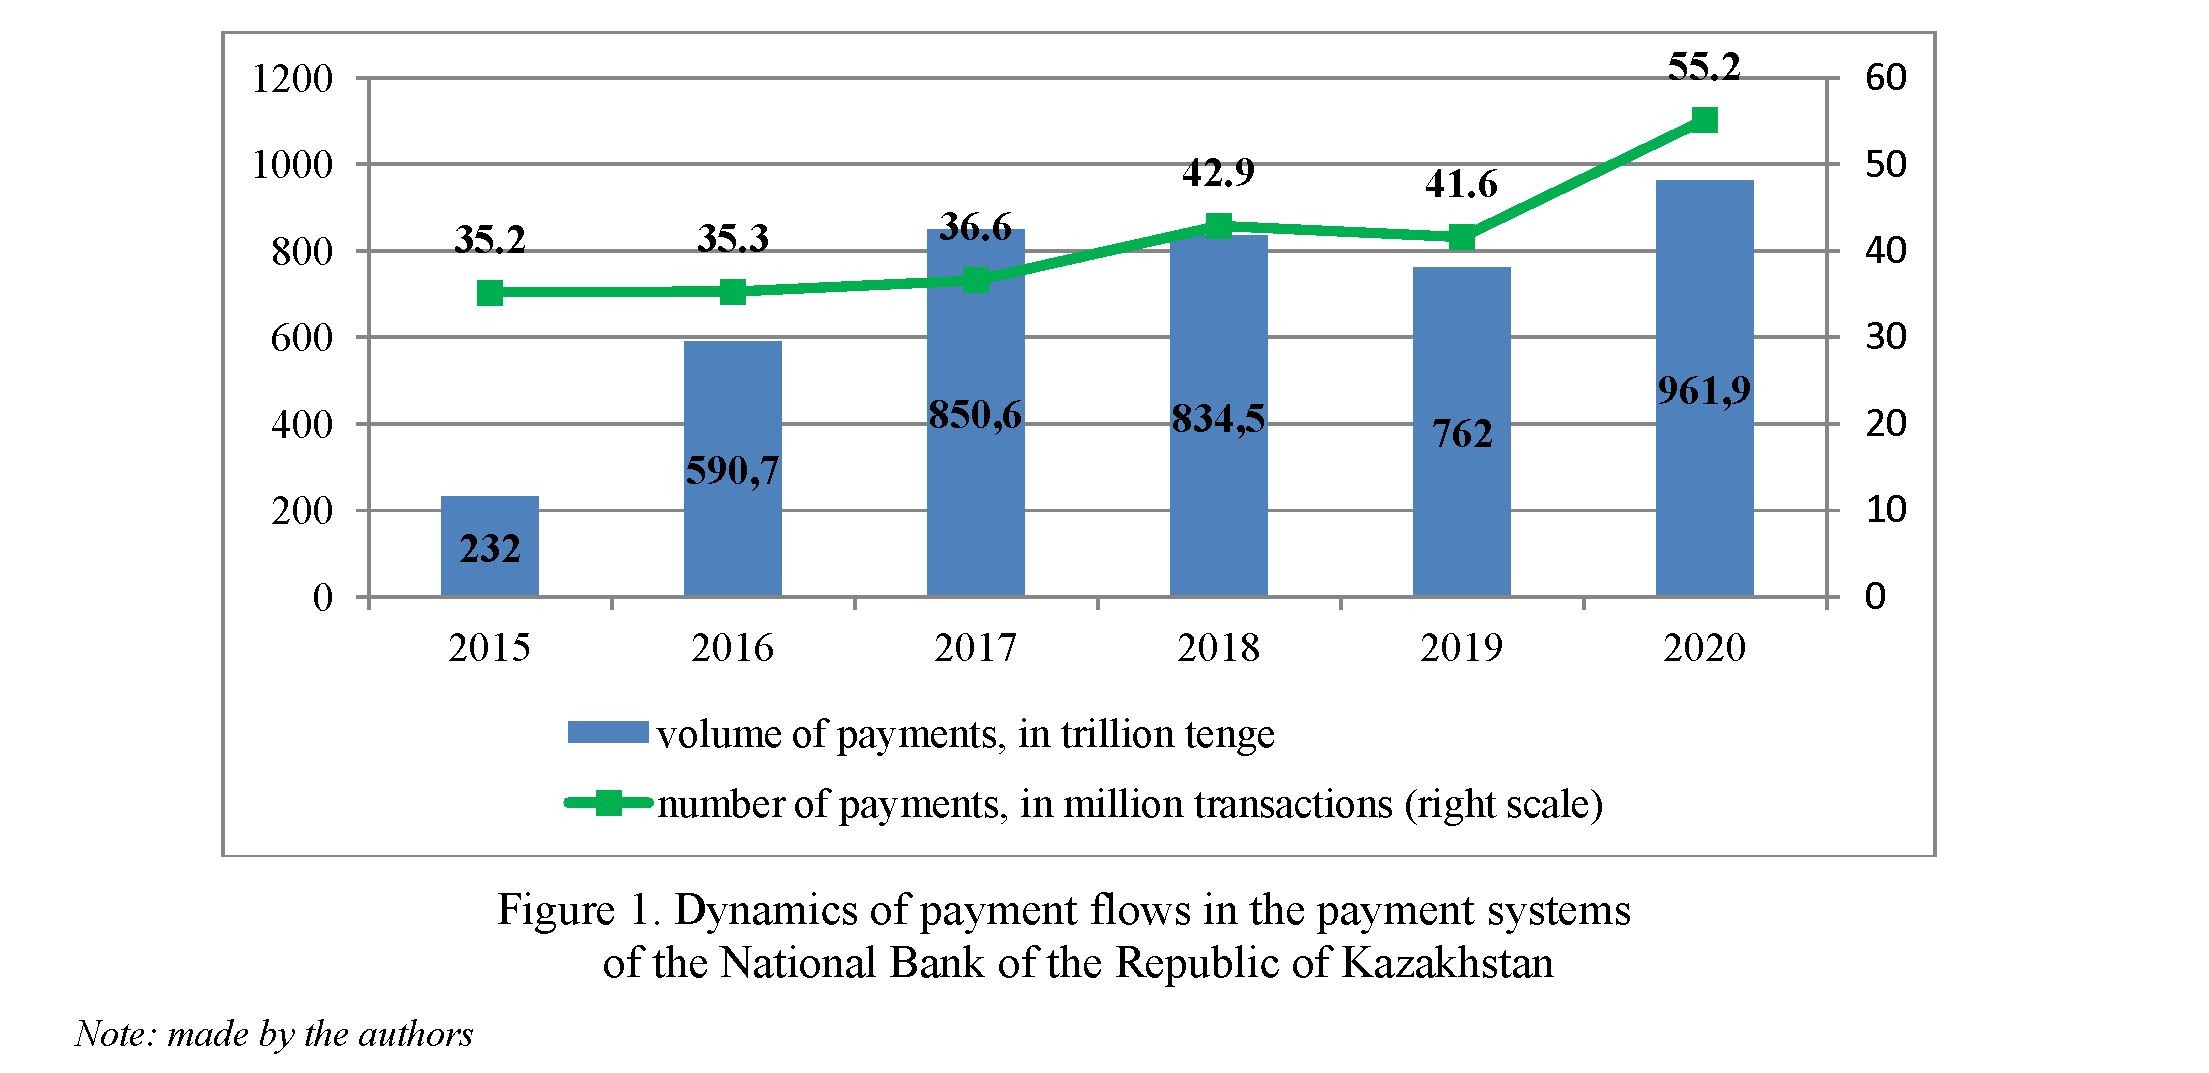 Digital payment technologies and interbank clearing in the Republic of Kazakhstan in terms of digitalization